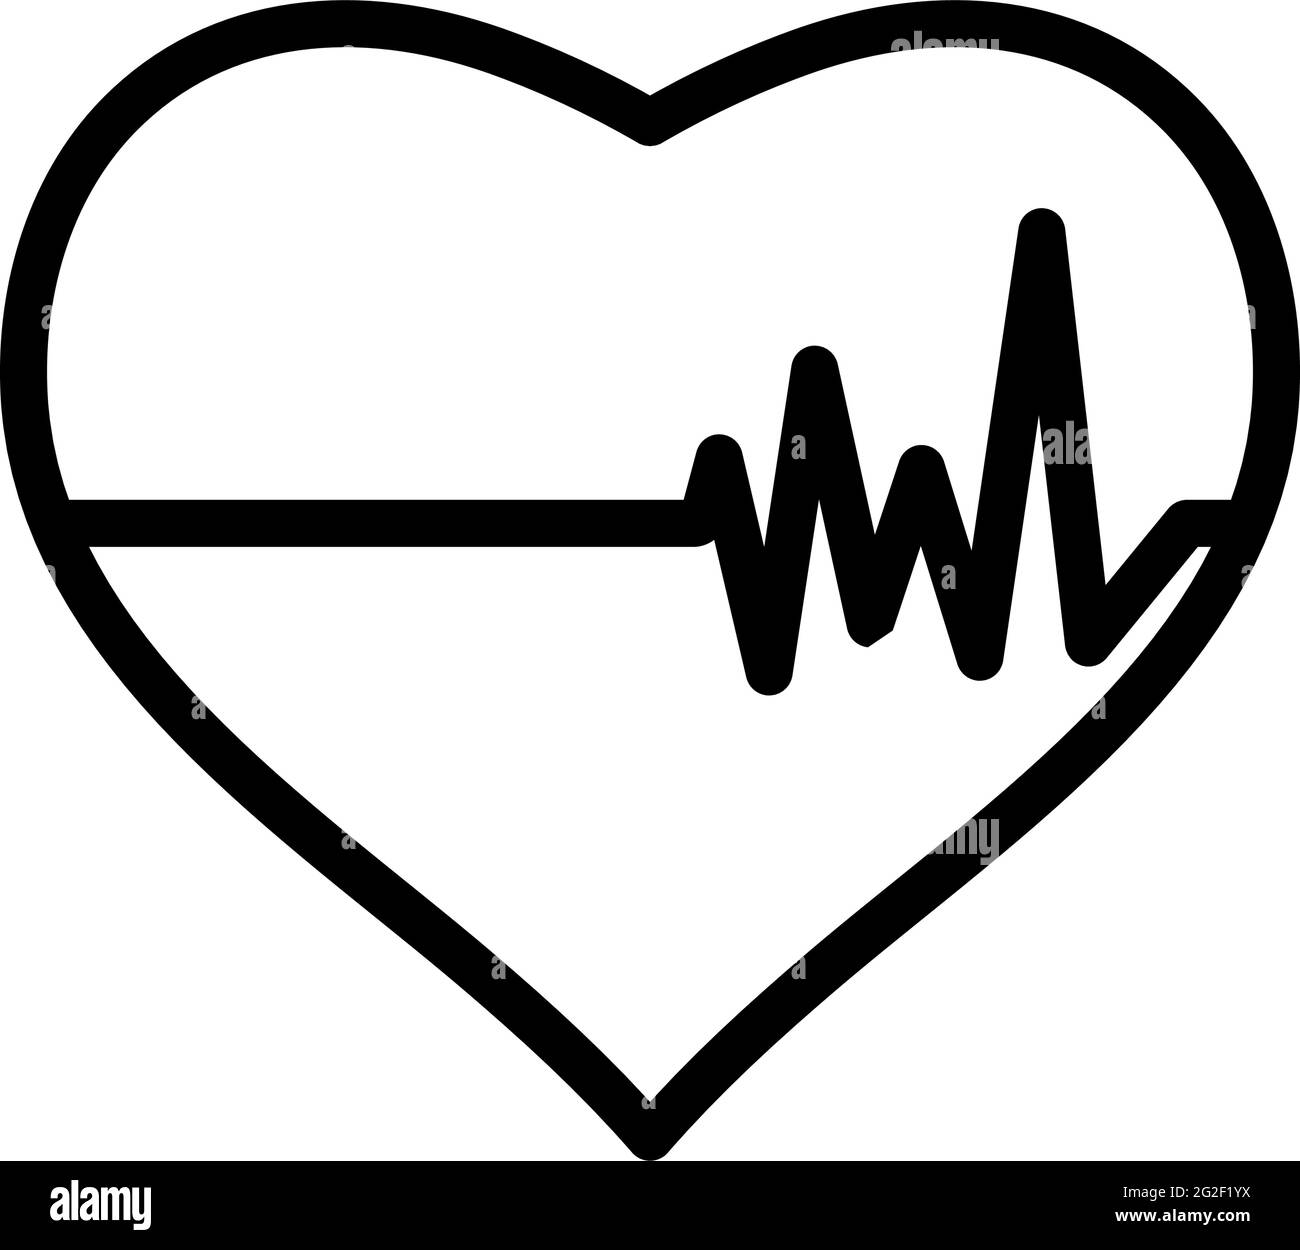 Icon Of Heart With Cardio Diagram. Bold outline design with editable ...